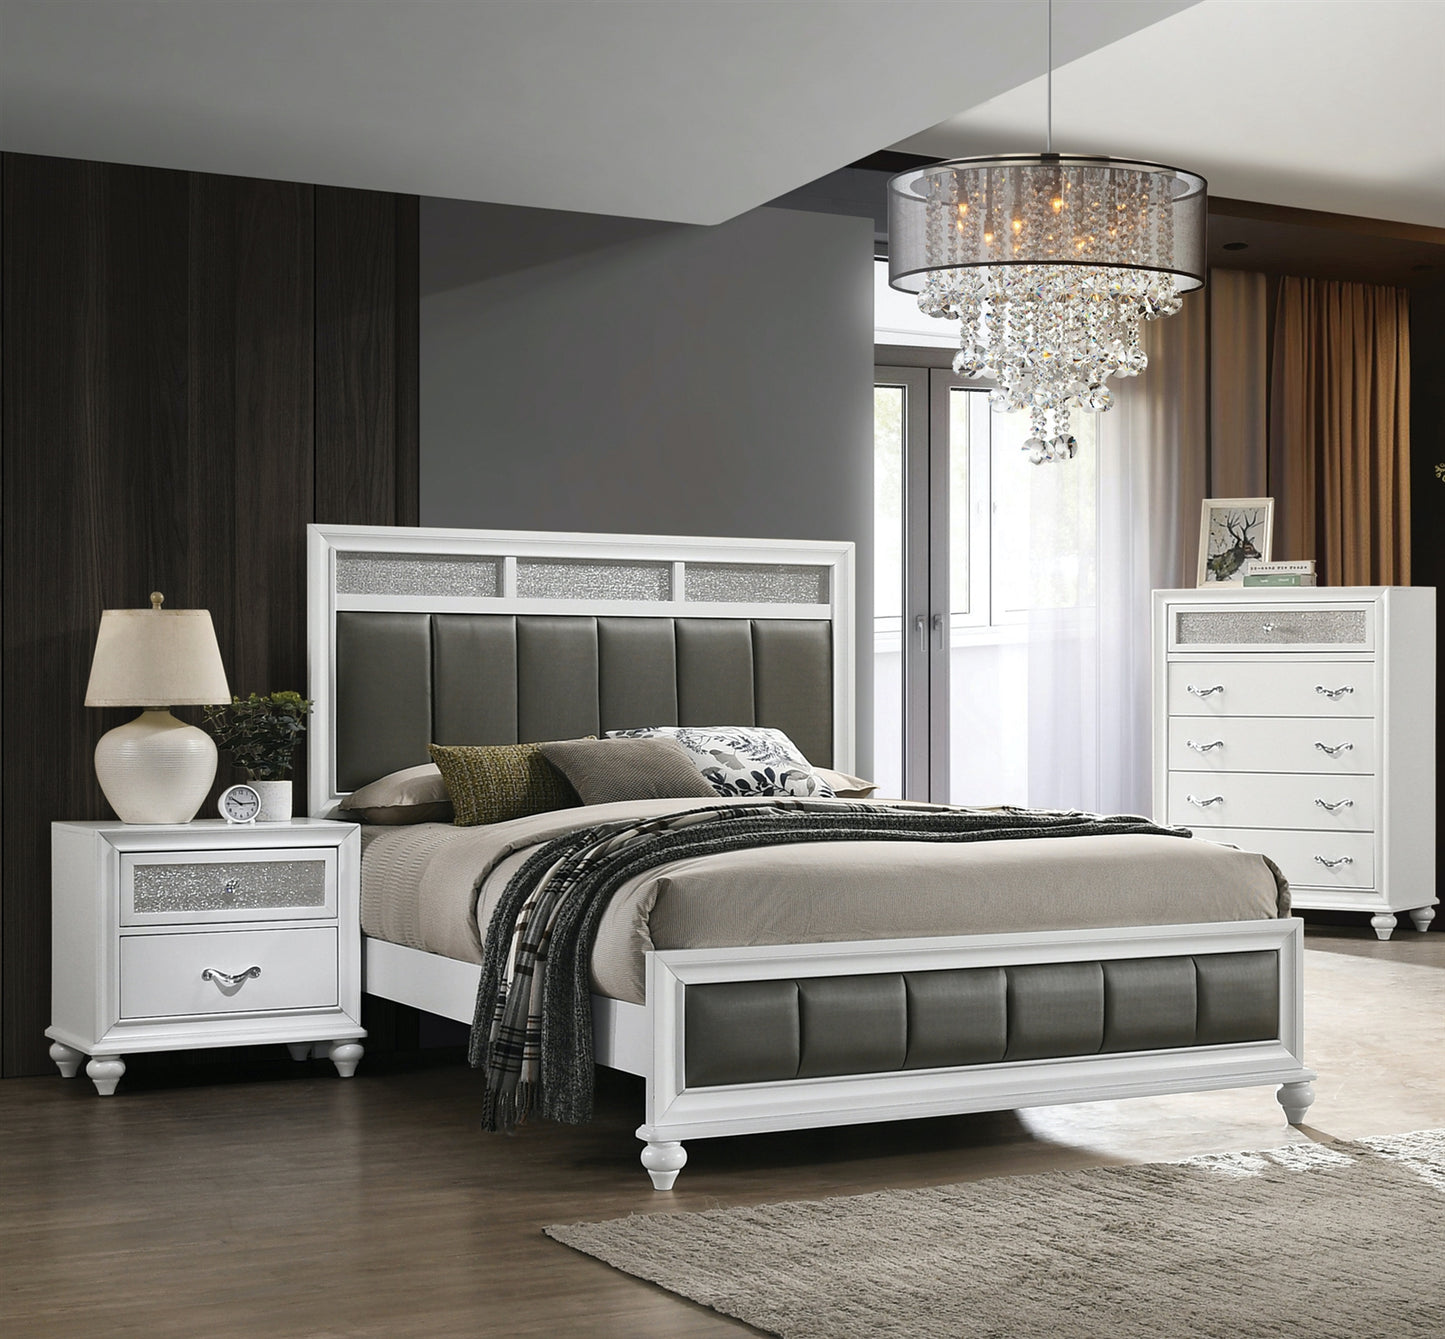 Barzini Bright White Queen Bed with Padded Headboard